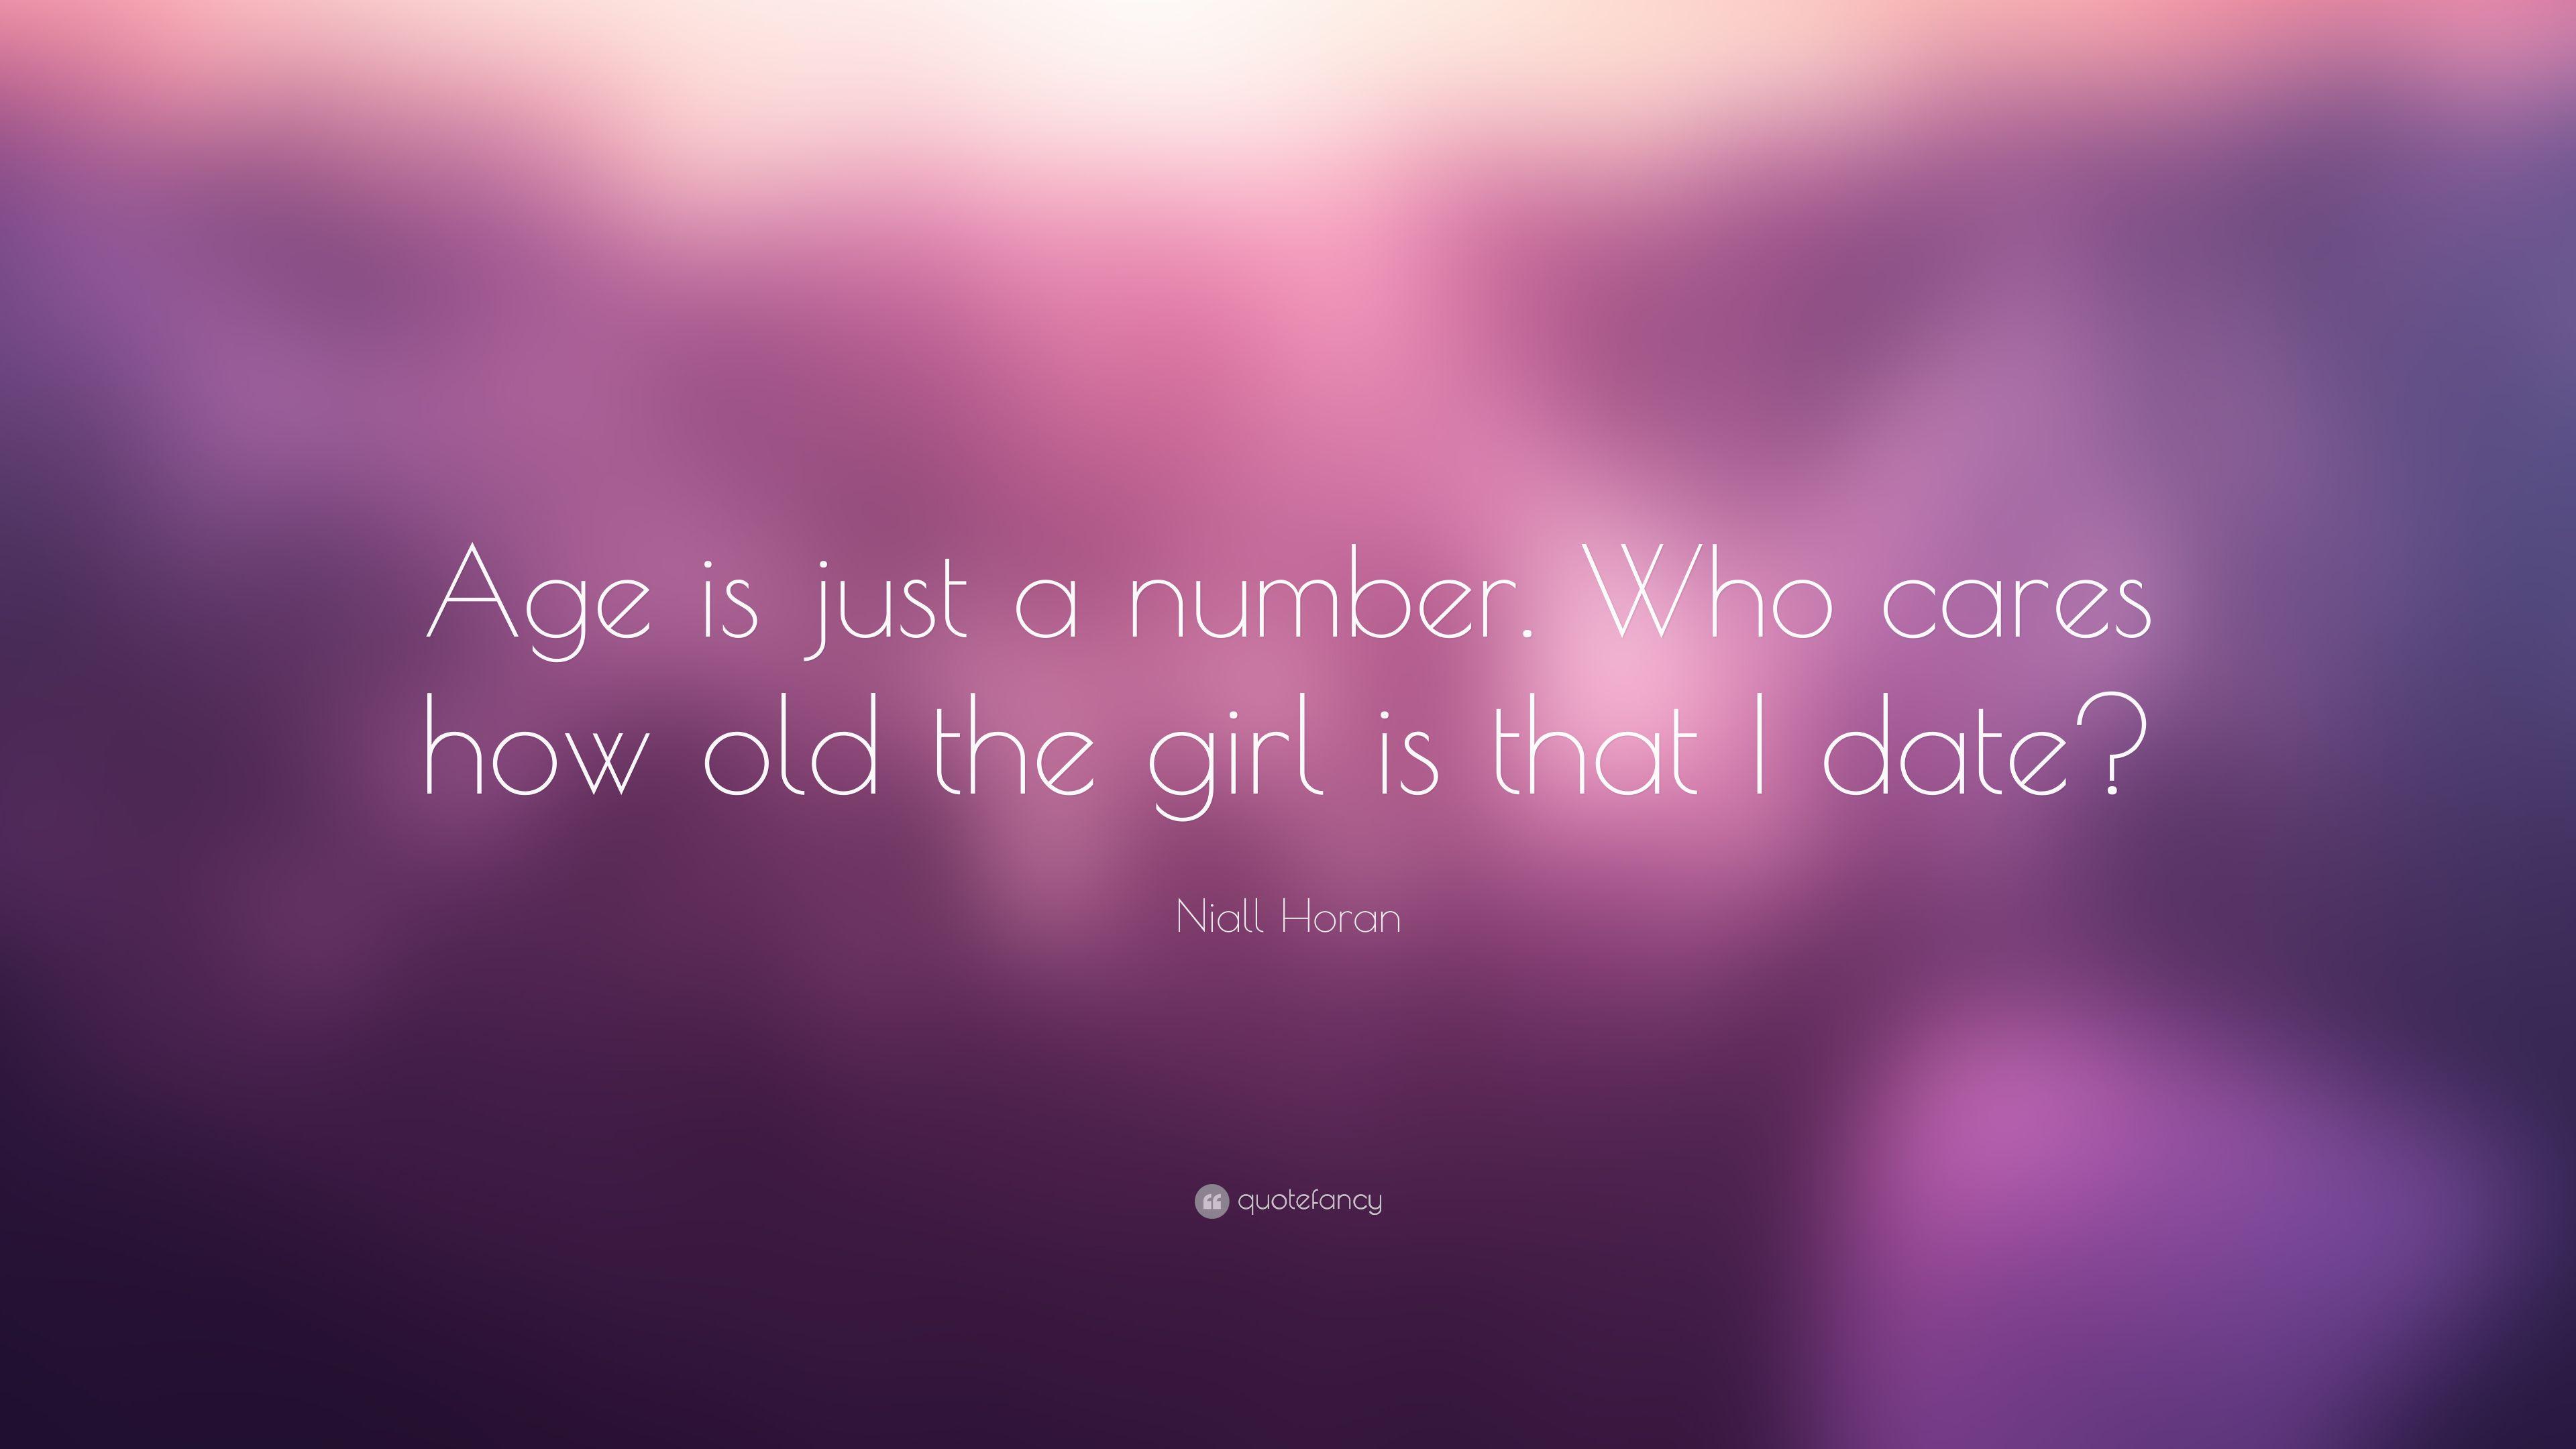 Niall Horan Quote: “Age is just a number. Who cares how old